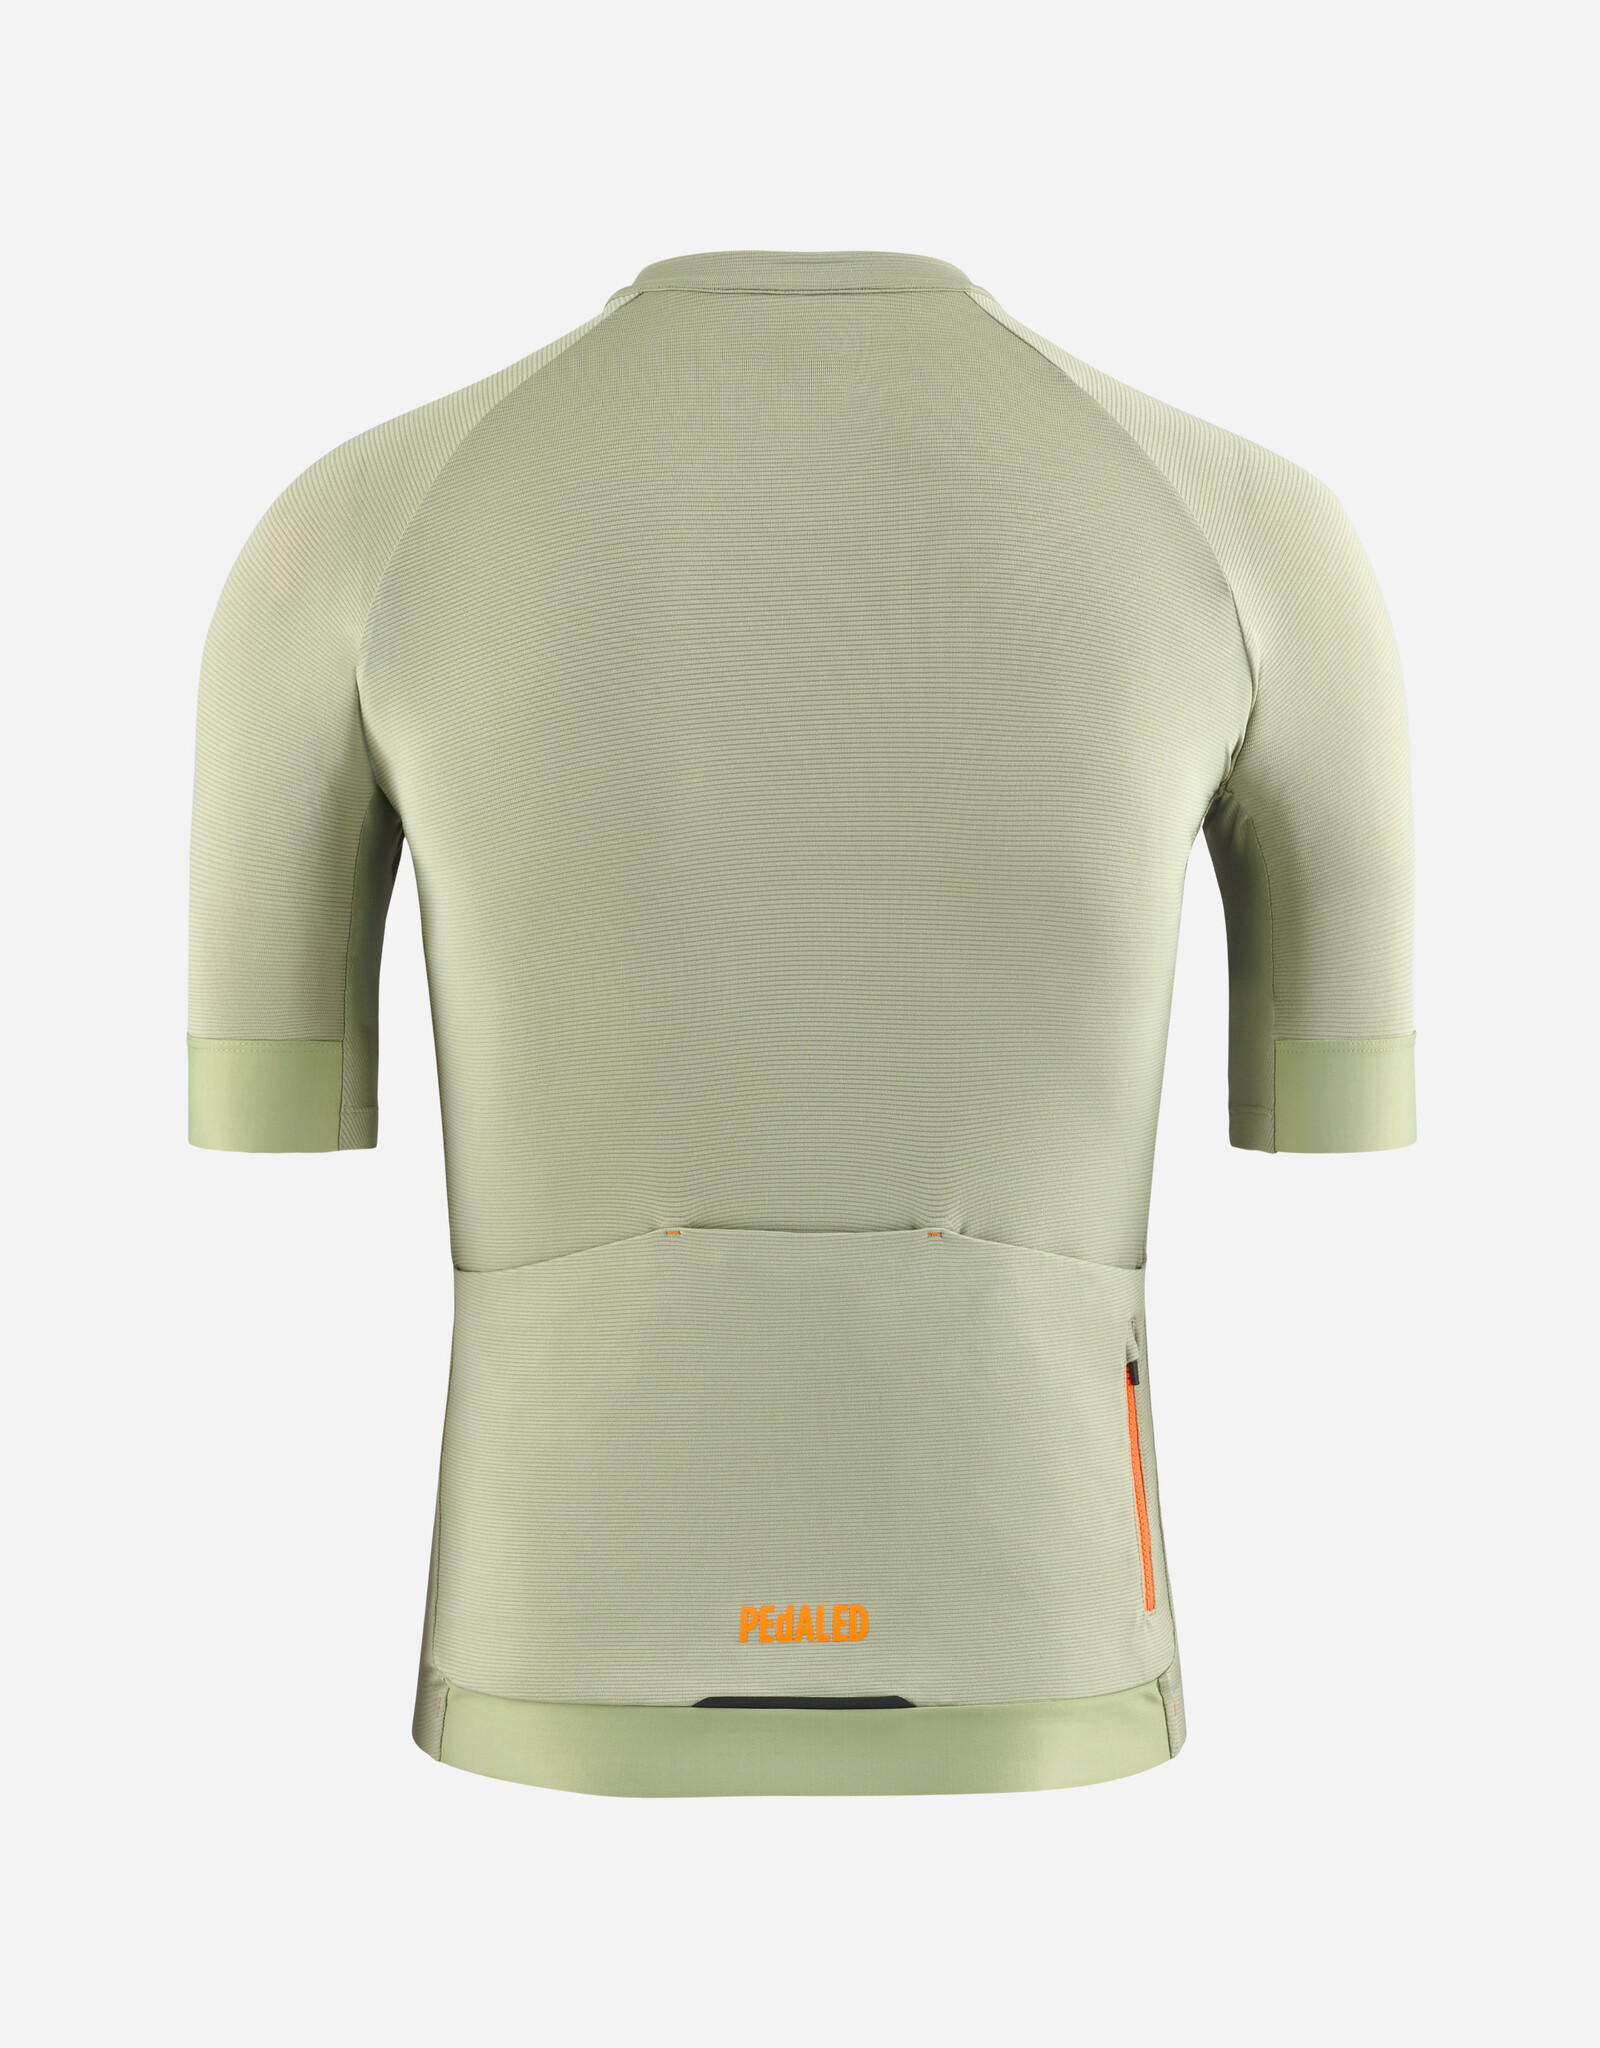 Pedaled Element Lightweight jersey (S 24)